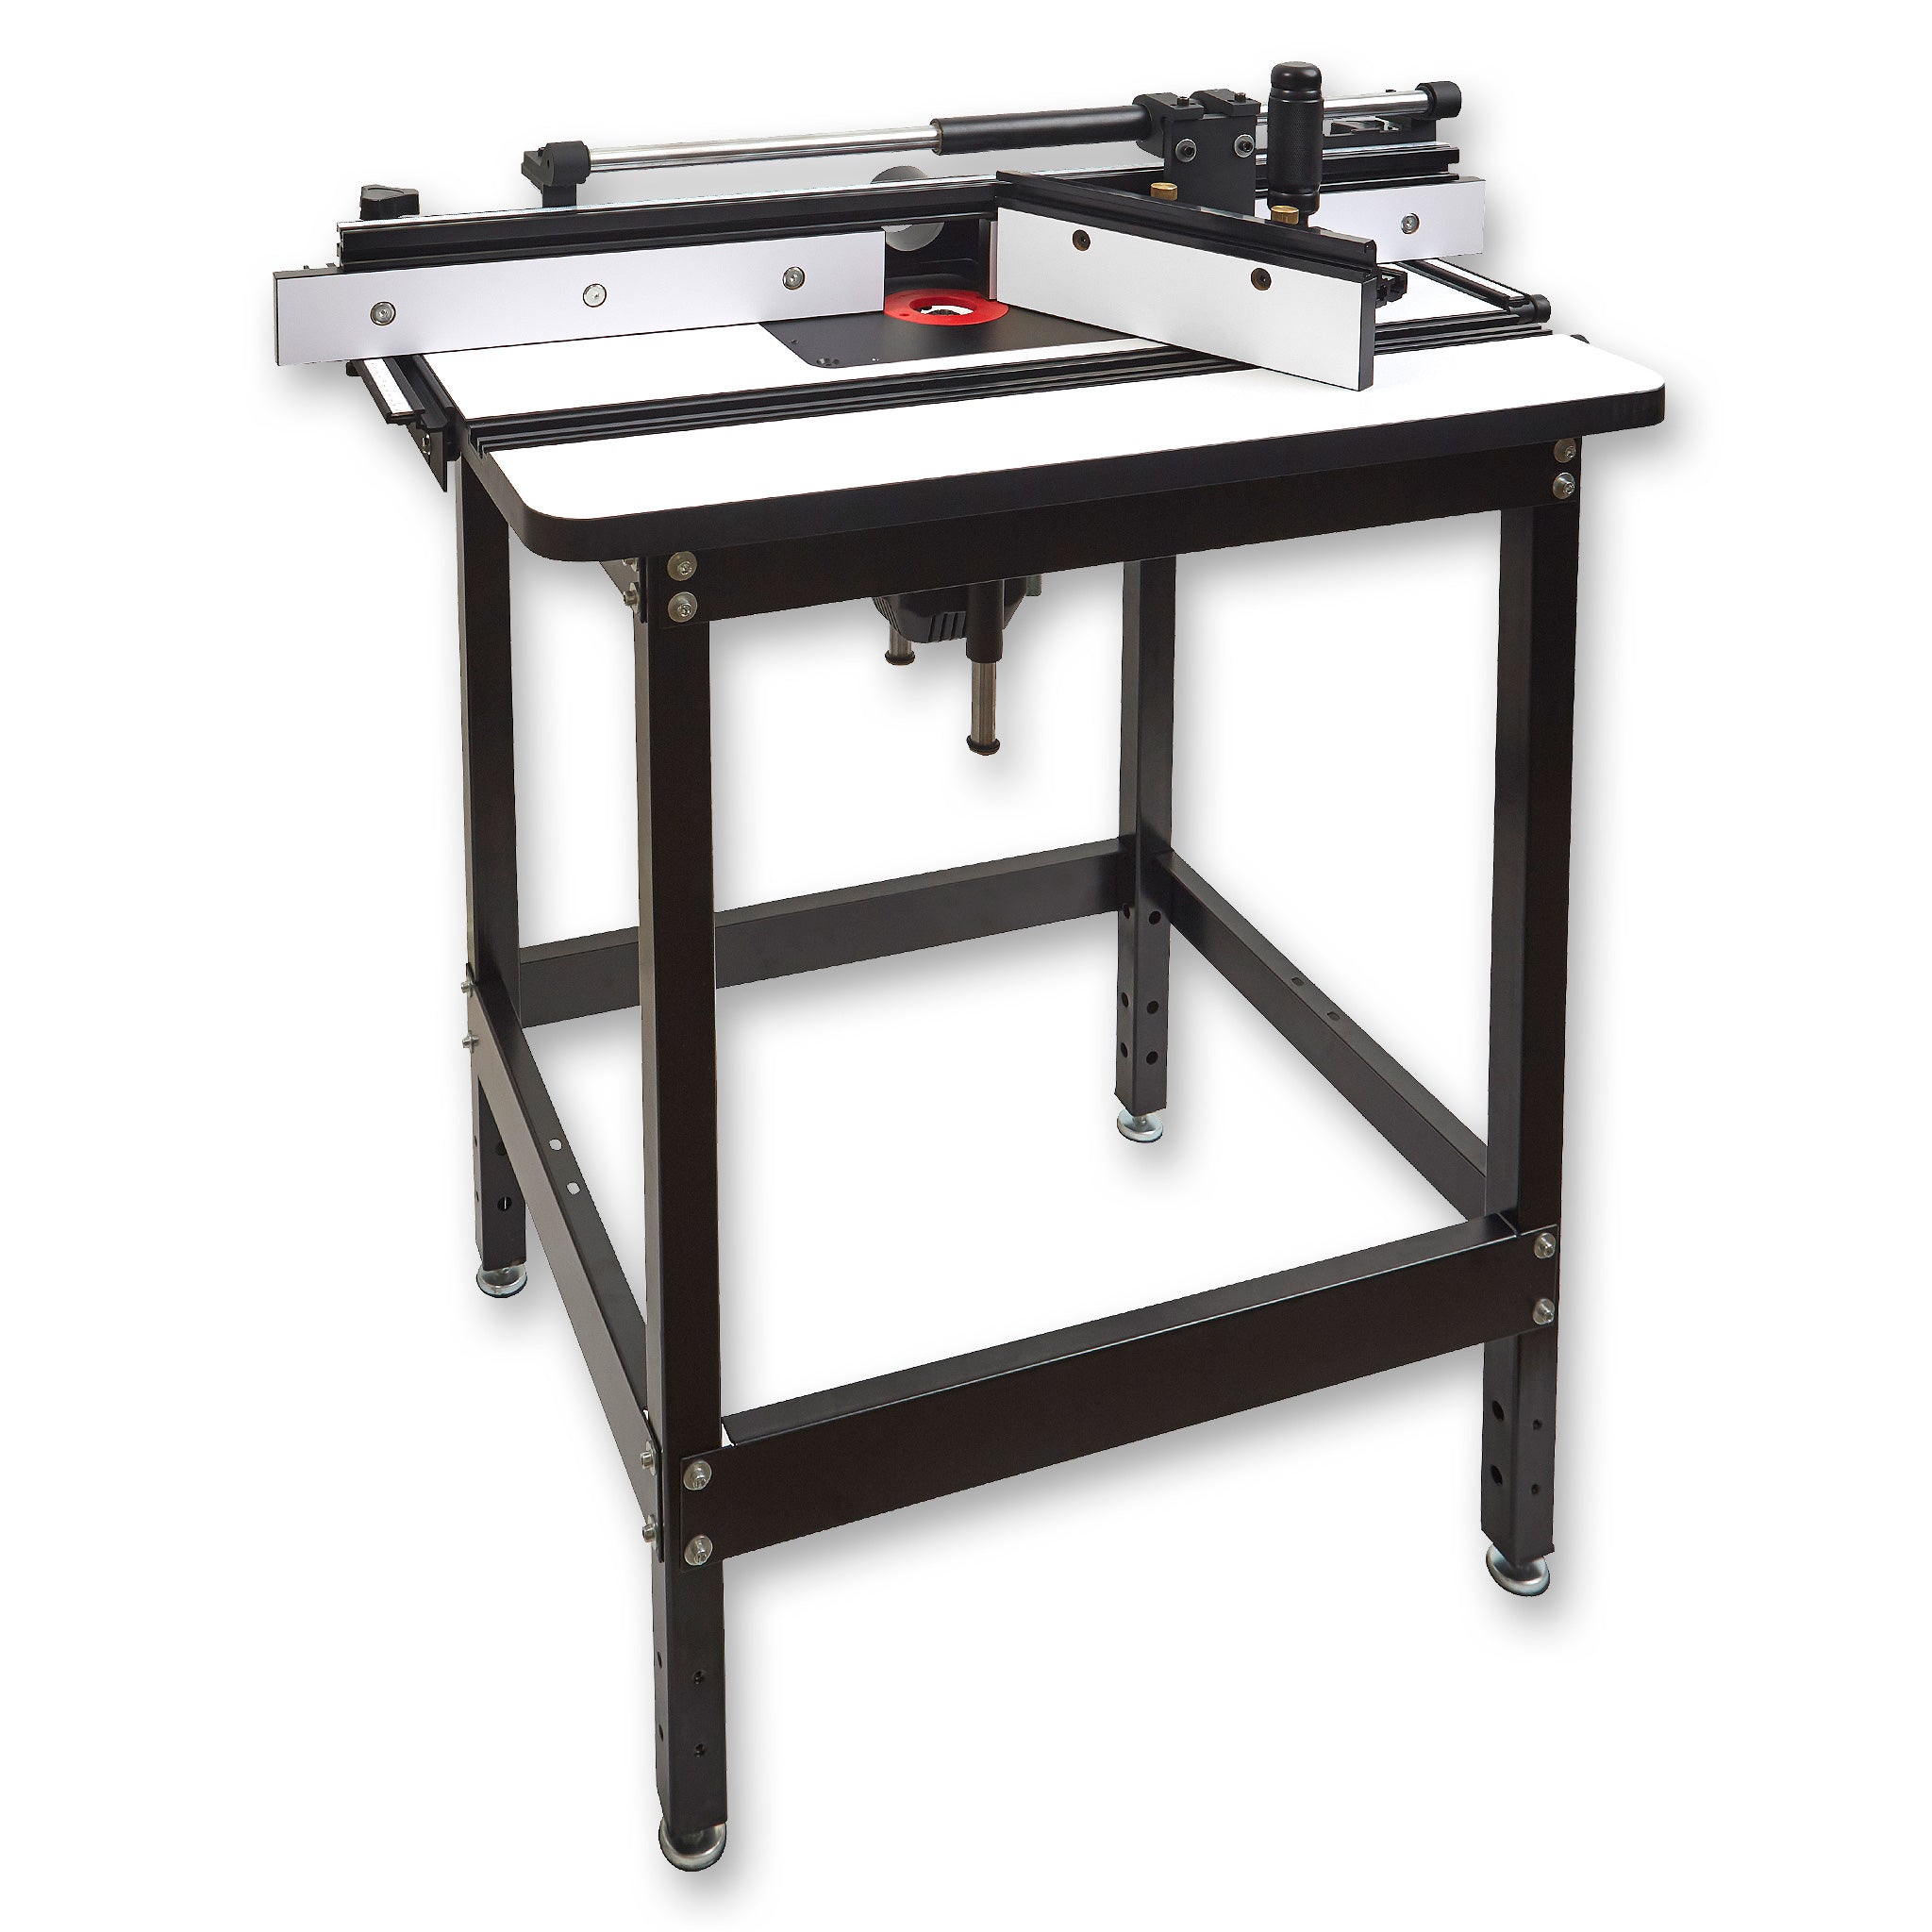 Router Table Sliding Carriage